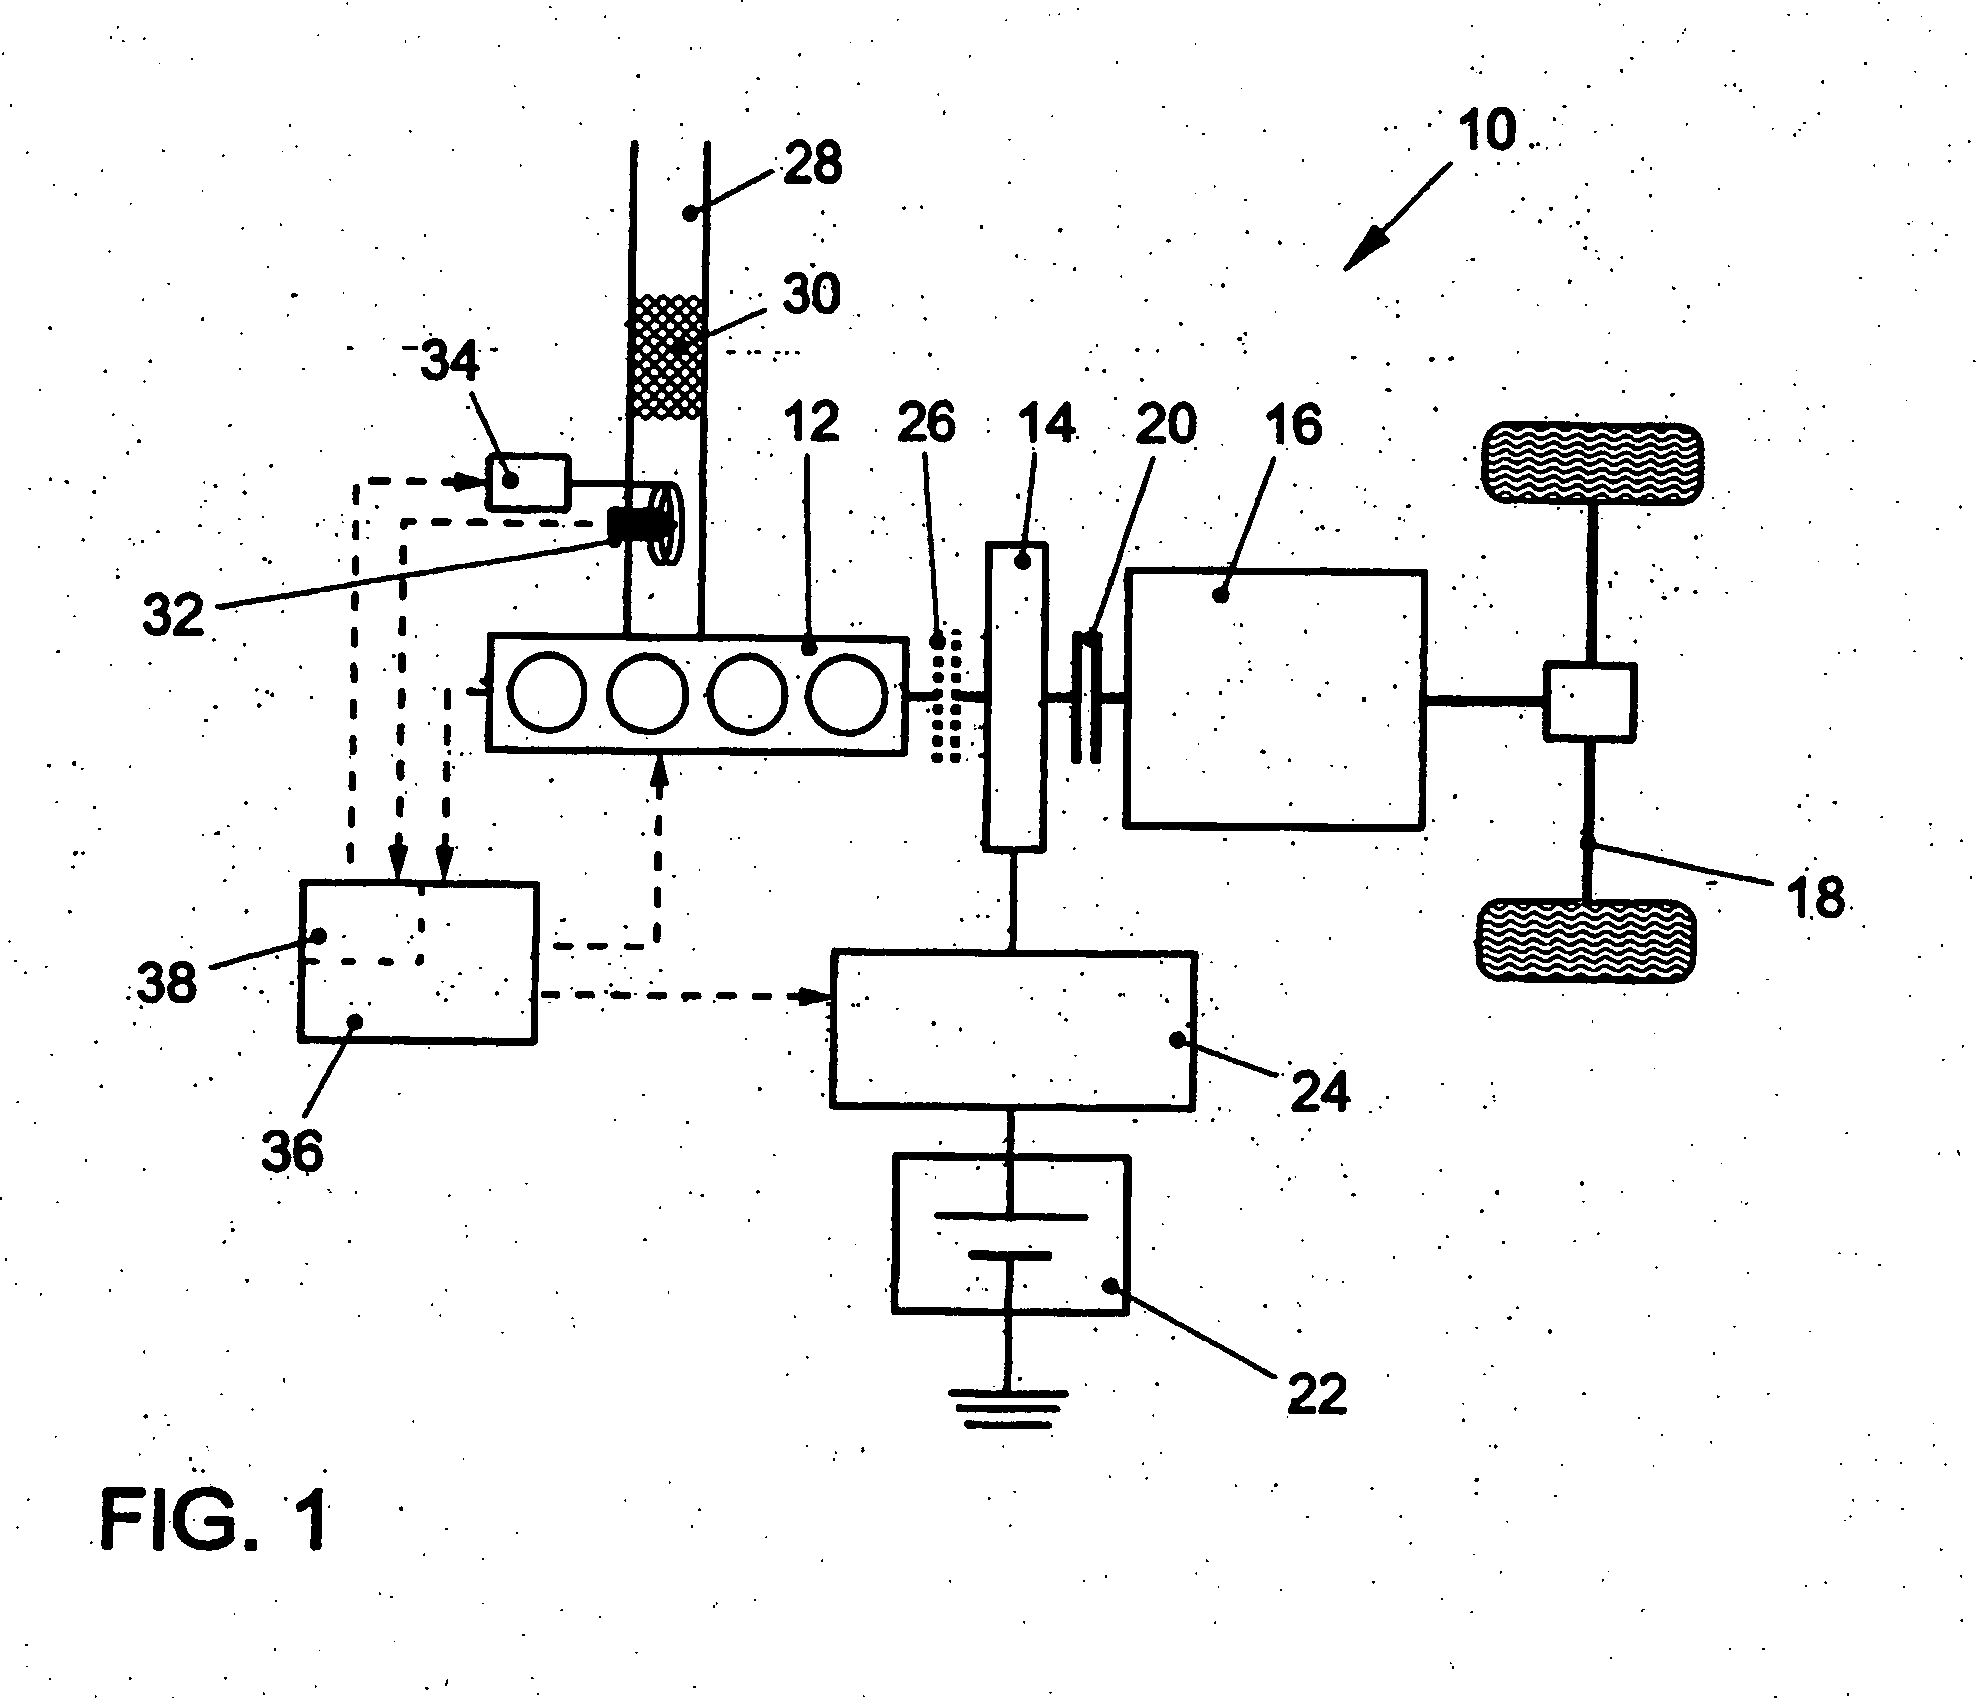 Method for Controlling an Operation of a Heatable Exhaust-Gas Sensor of a Motor Vehicle